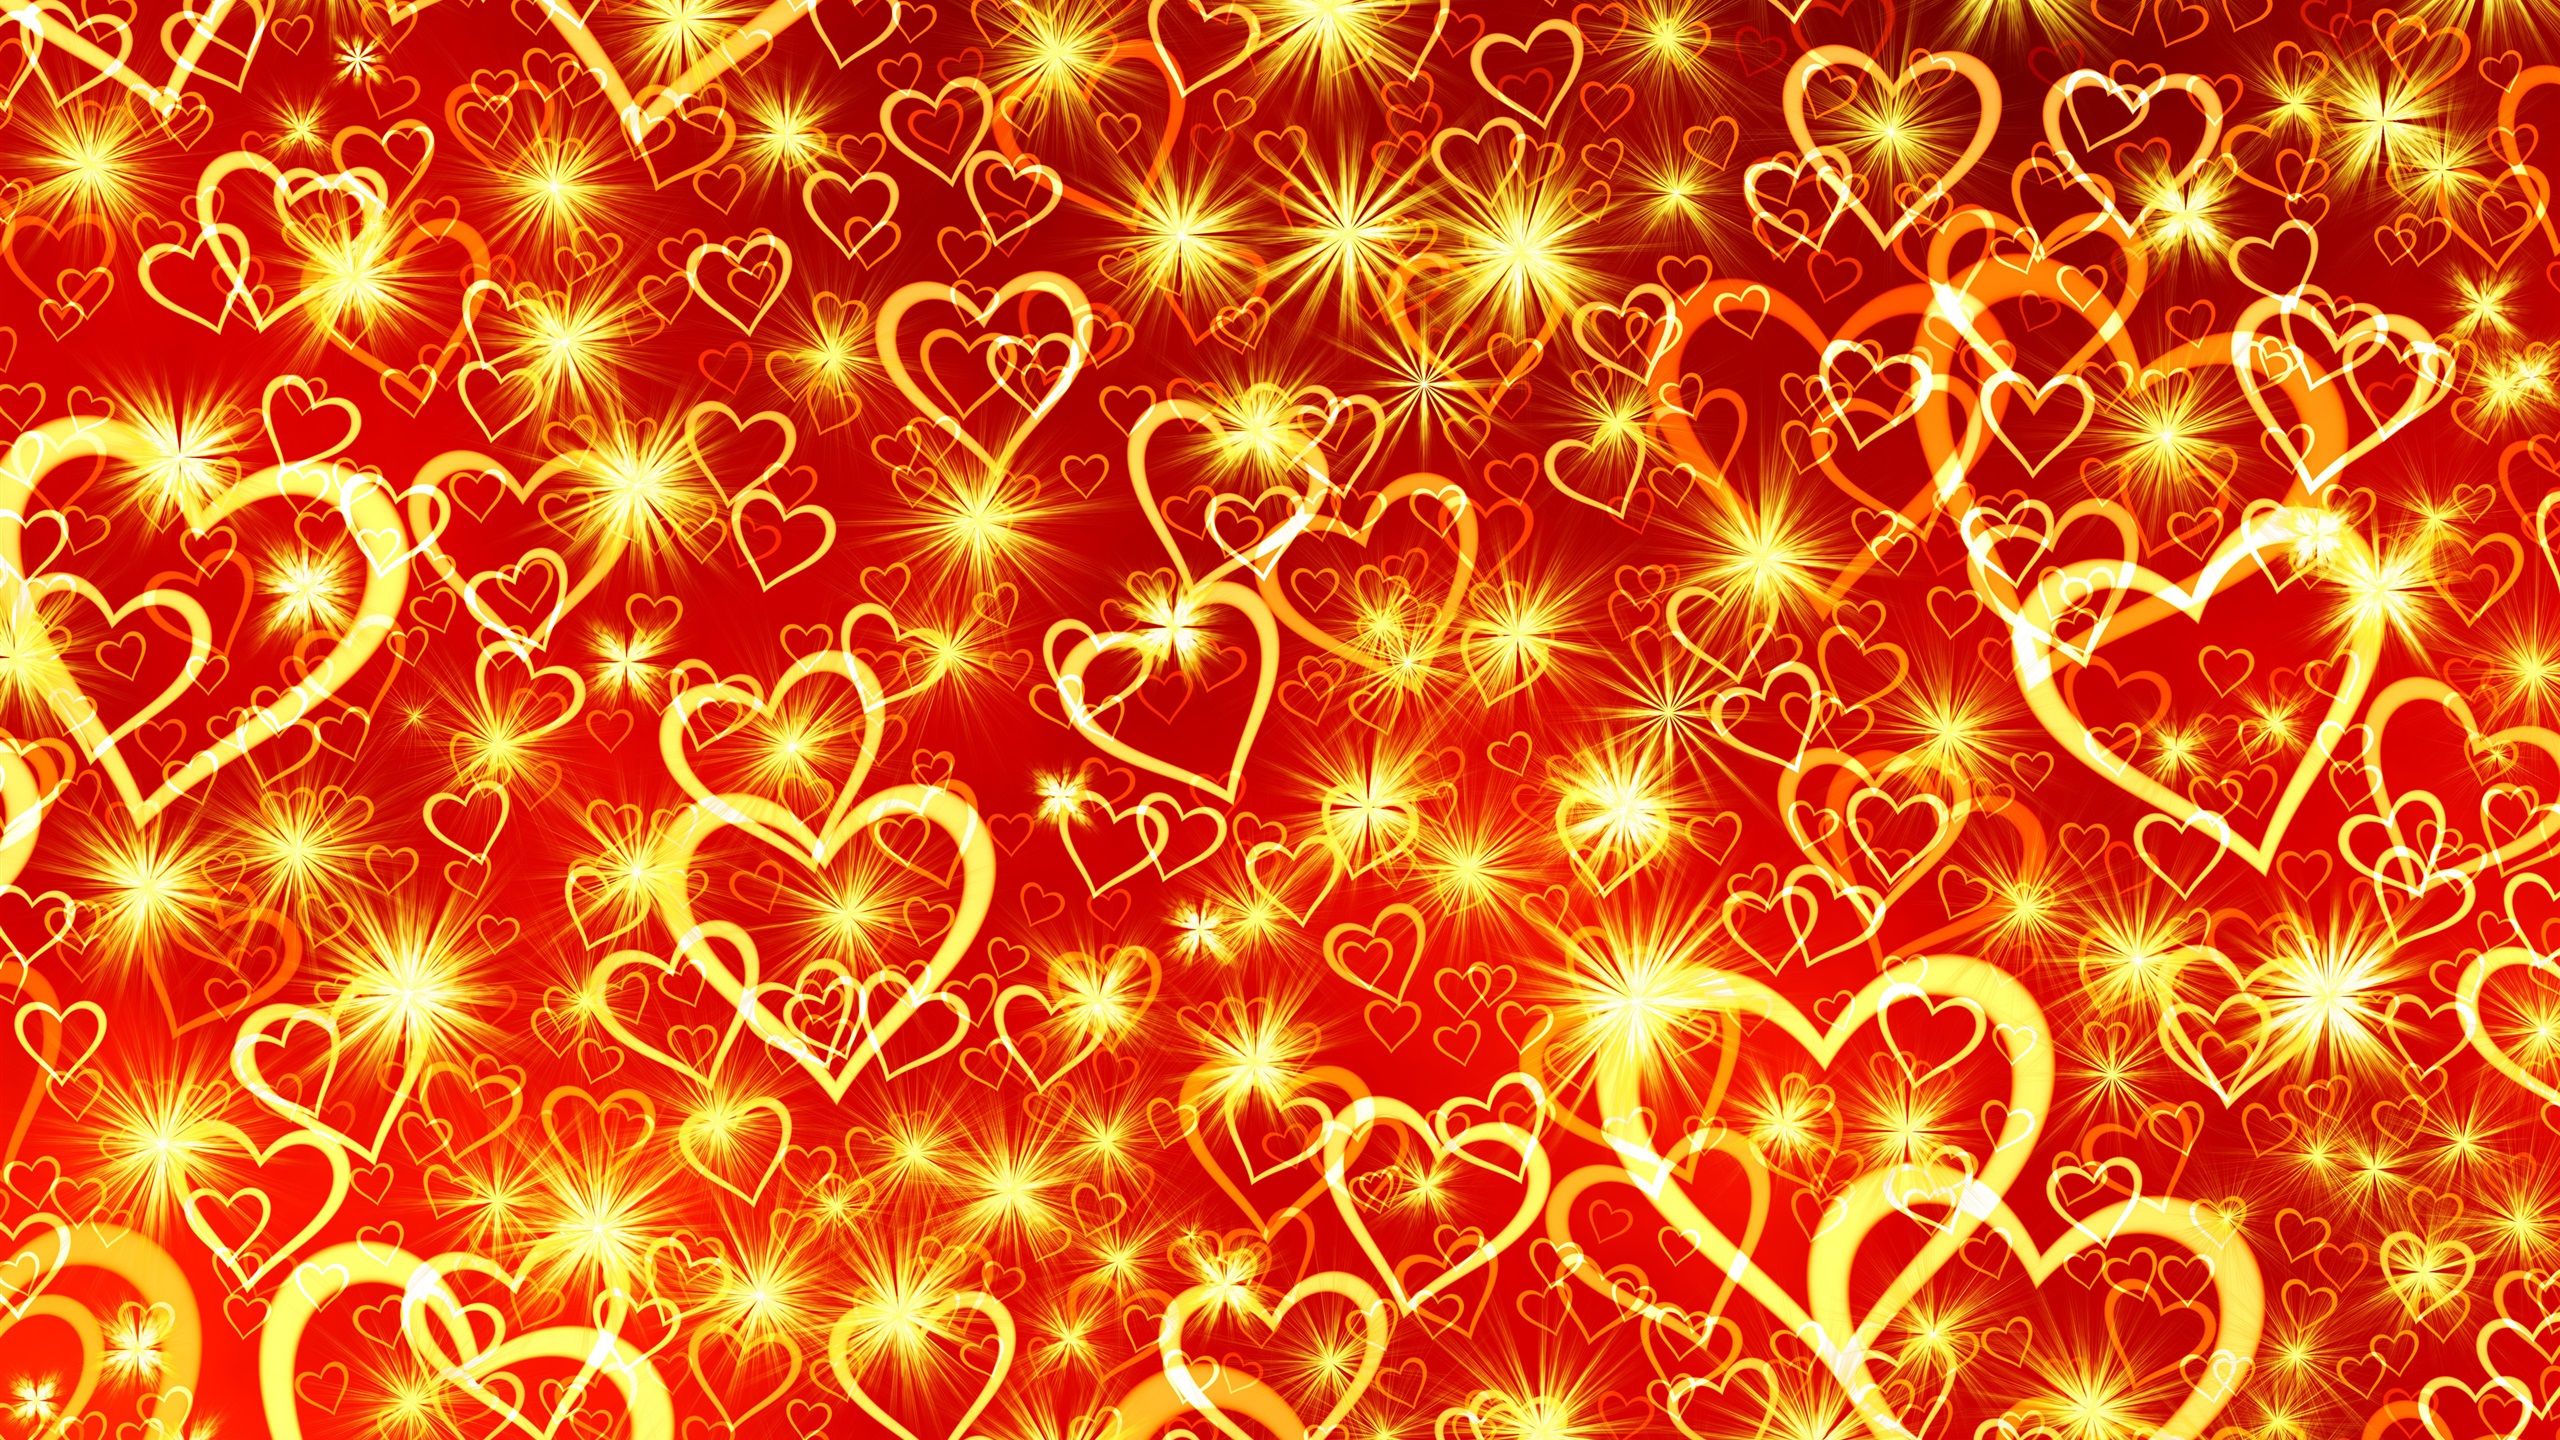 Many Golden Love Hearts, Red Background 1080x1920 IPhone 8 7 6 6S Plus Wallpaper, Background, Picture, Image